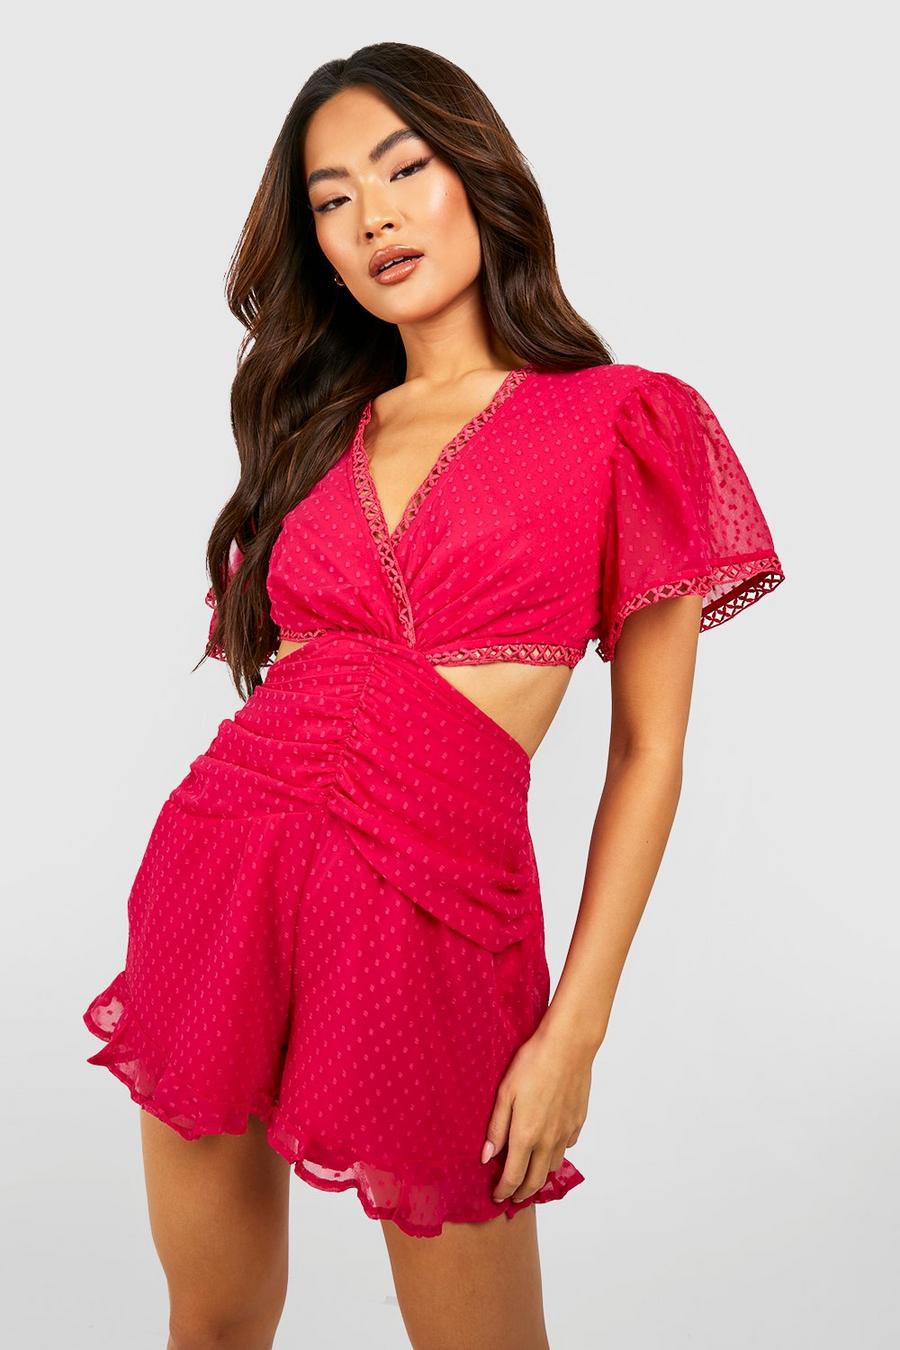 Cut-Out Playsuit, Hot pink